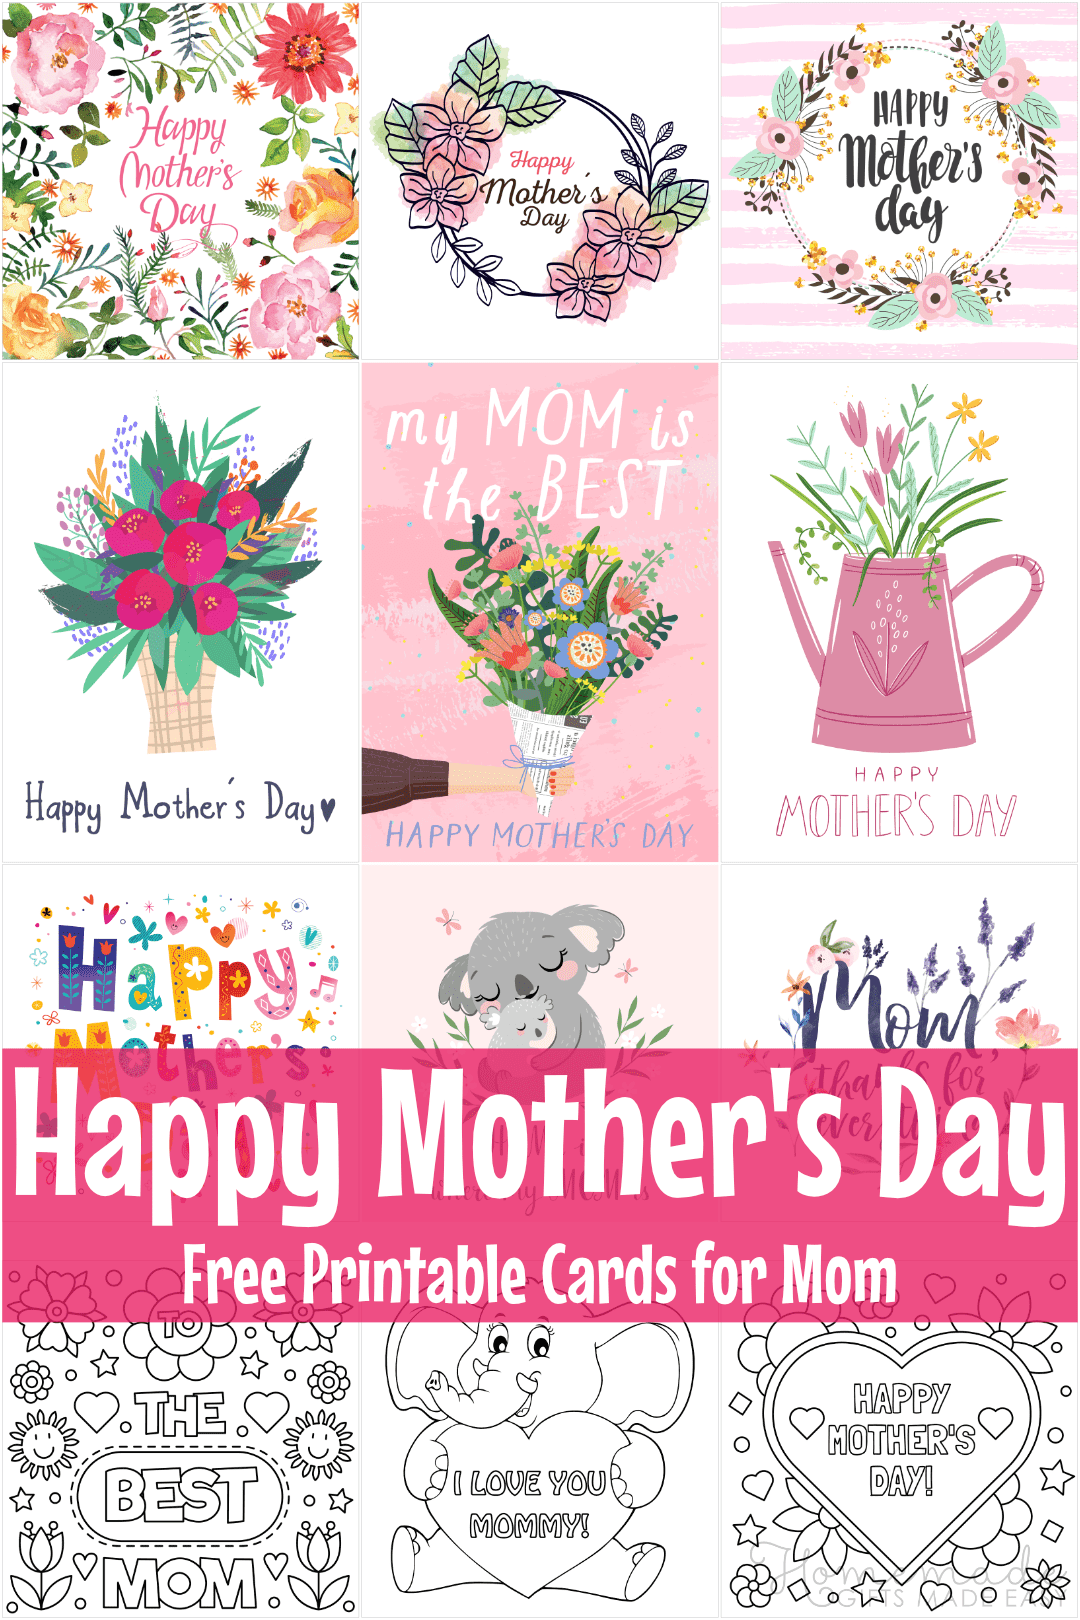 128-free-printable-mother-s-day-cards-for-your-mom-happy-mother-s-day